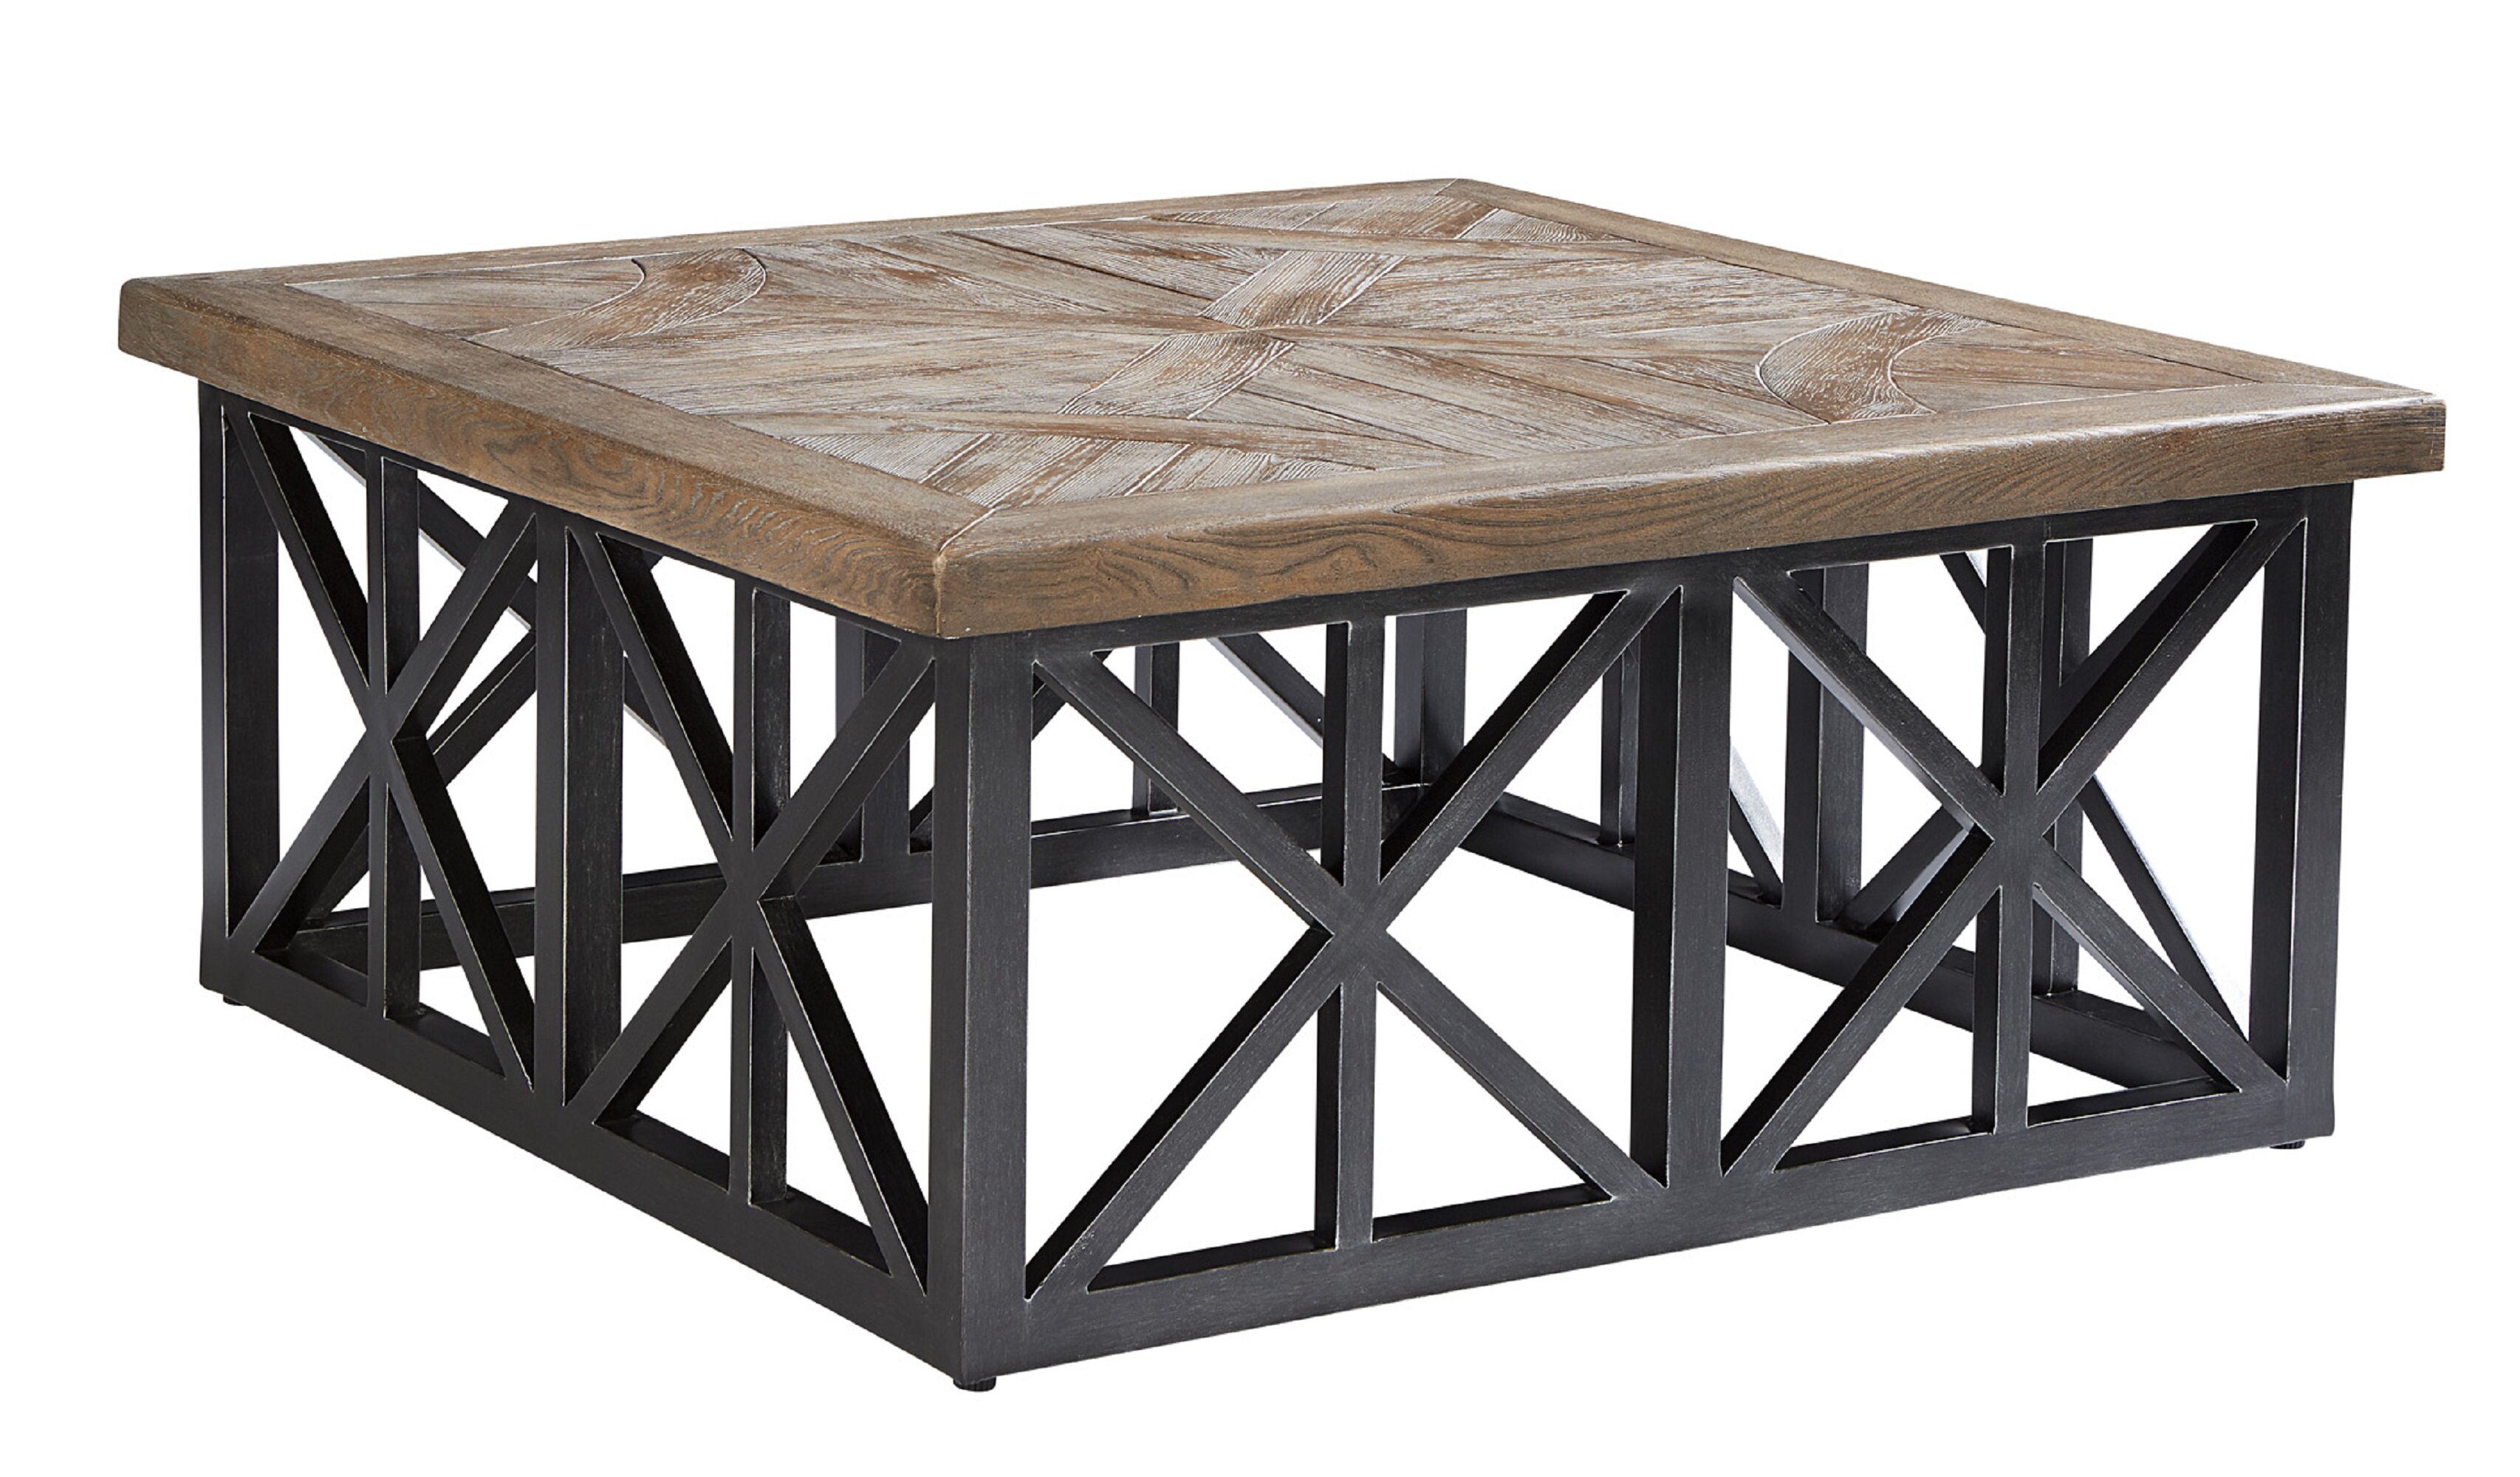 Square Concrete Top Coffee Table / Nyboda Coffee Table W Reversible